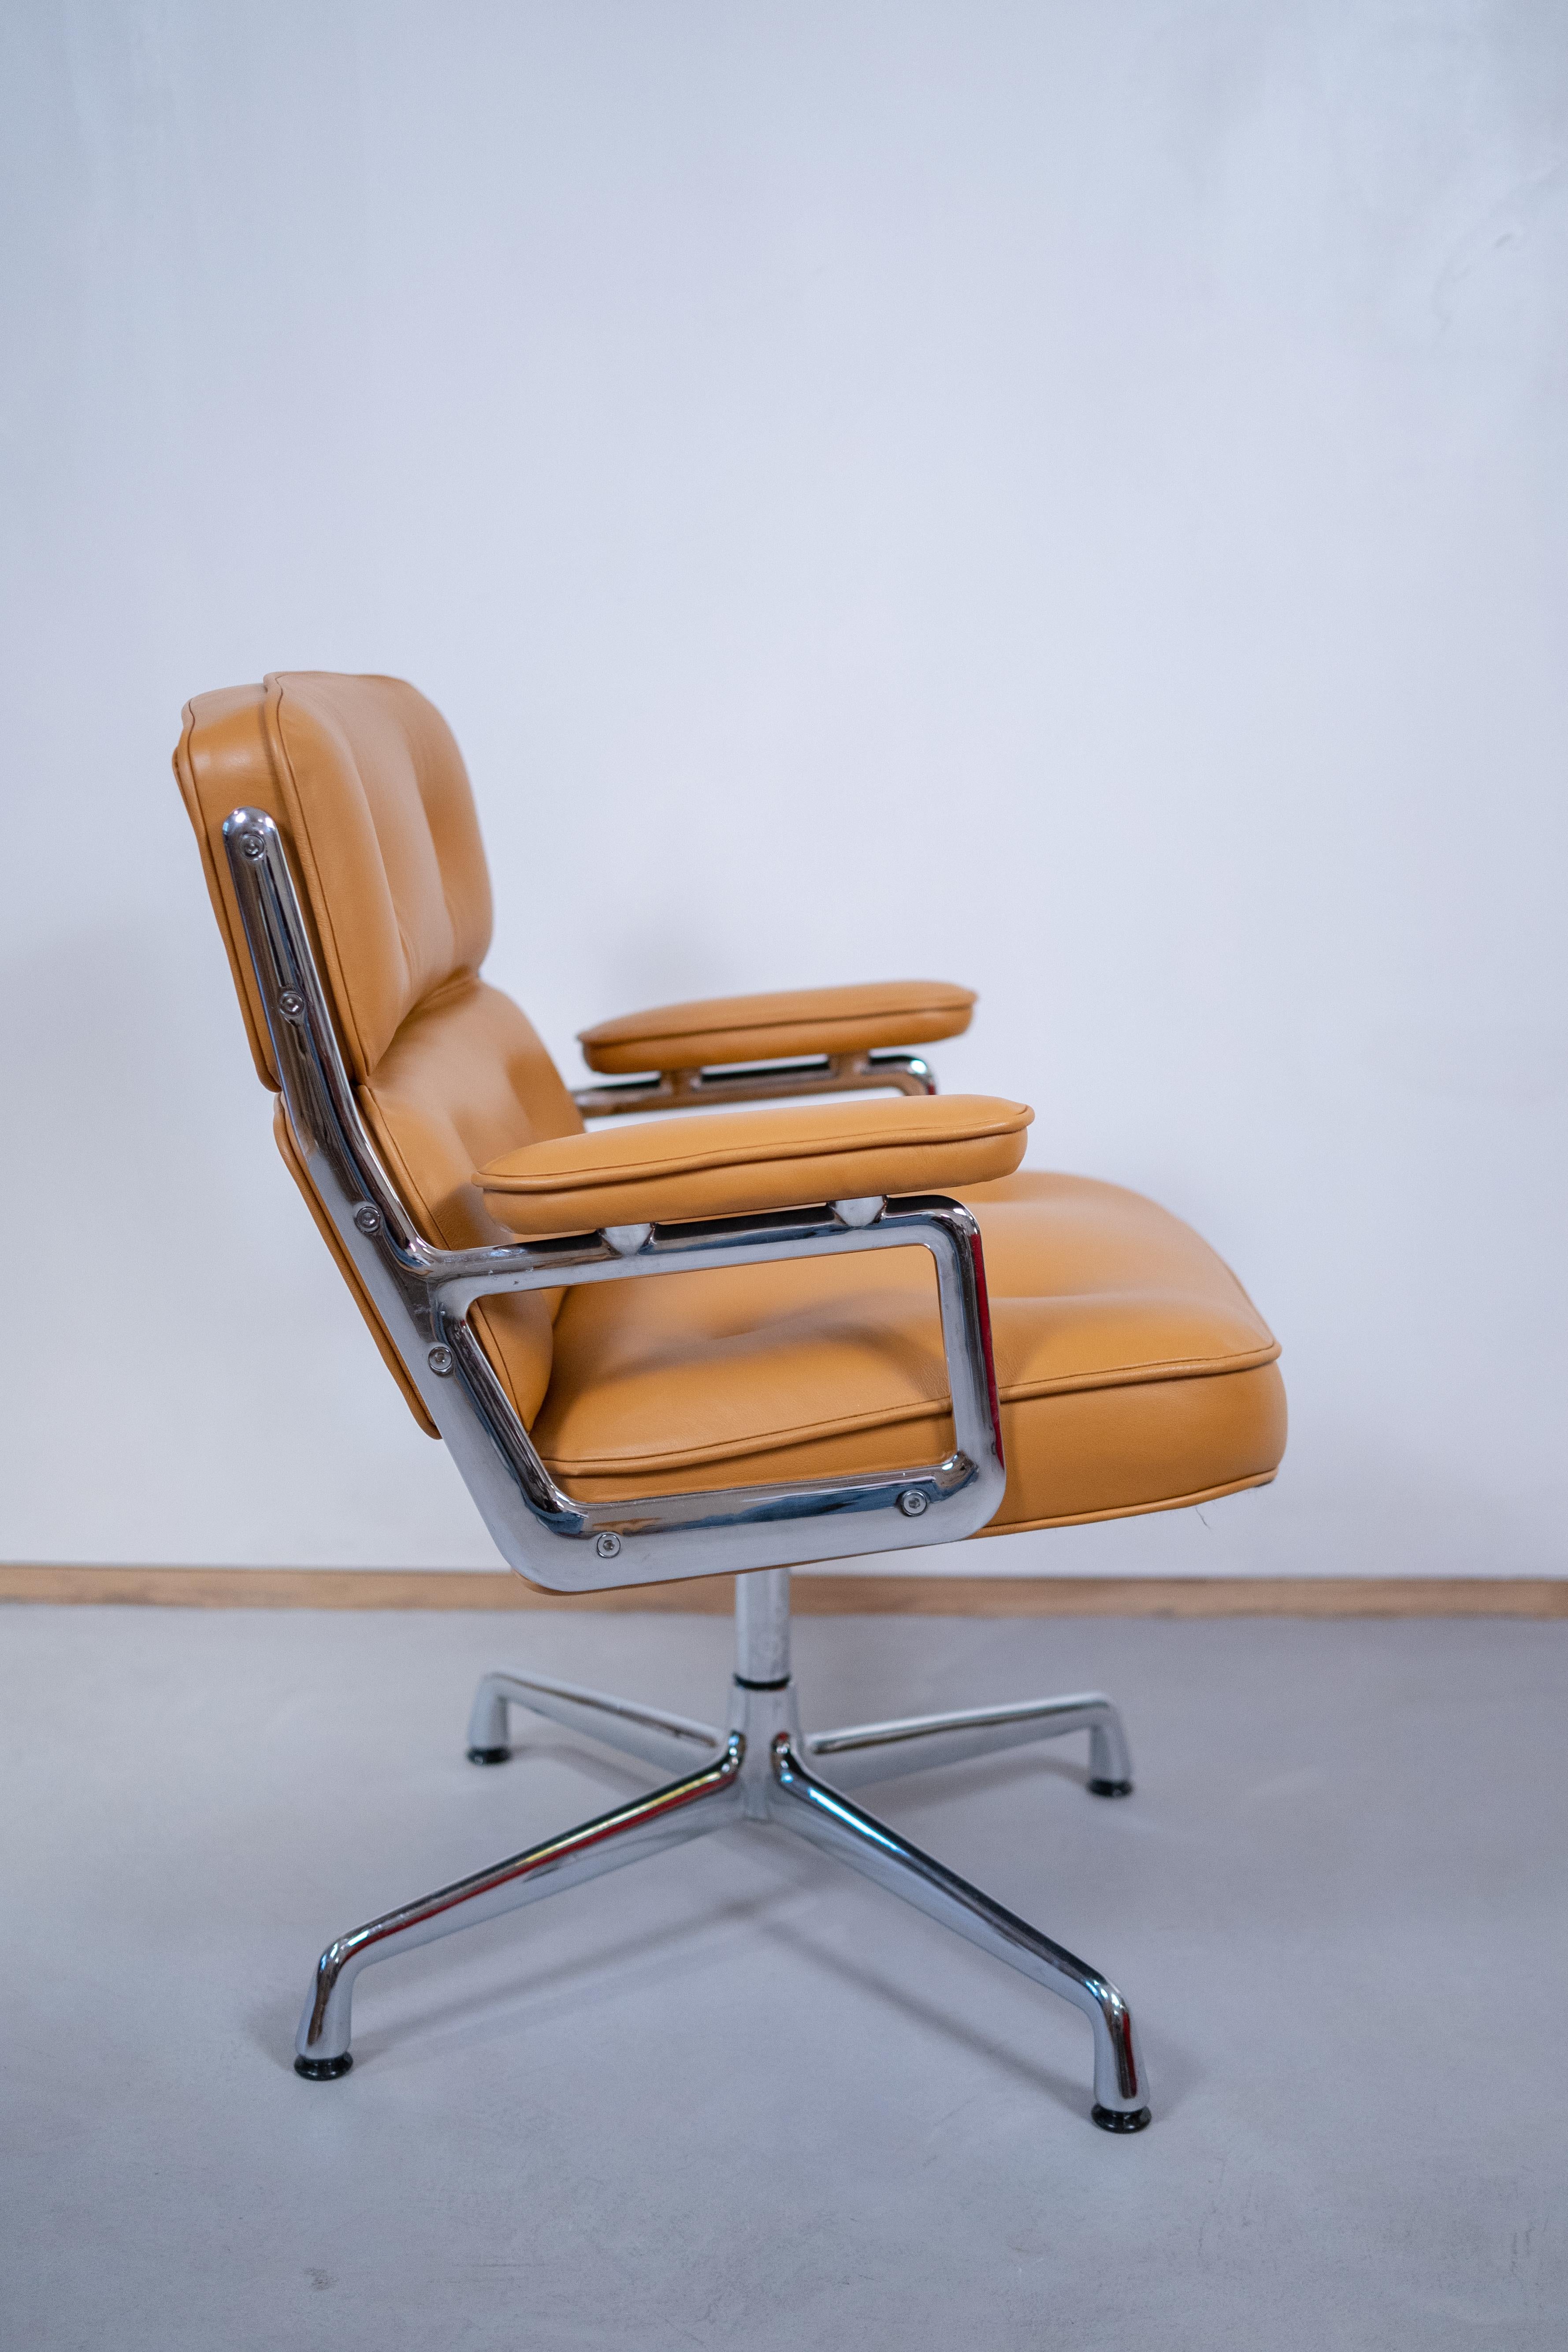 Lobby Chair ES 108 by Charles & Ray Eames, Herman Miller for Vitra.
originally designed for the lobby at the Rockefeller Center in New York.

the chair has three separate cushions connected by the frame and soft armrests.
4-star base made of